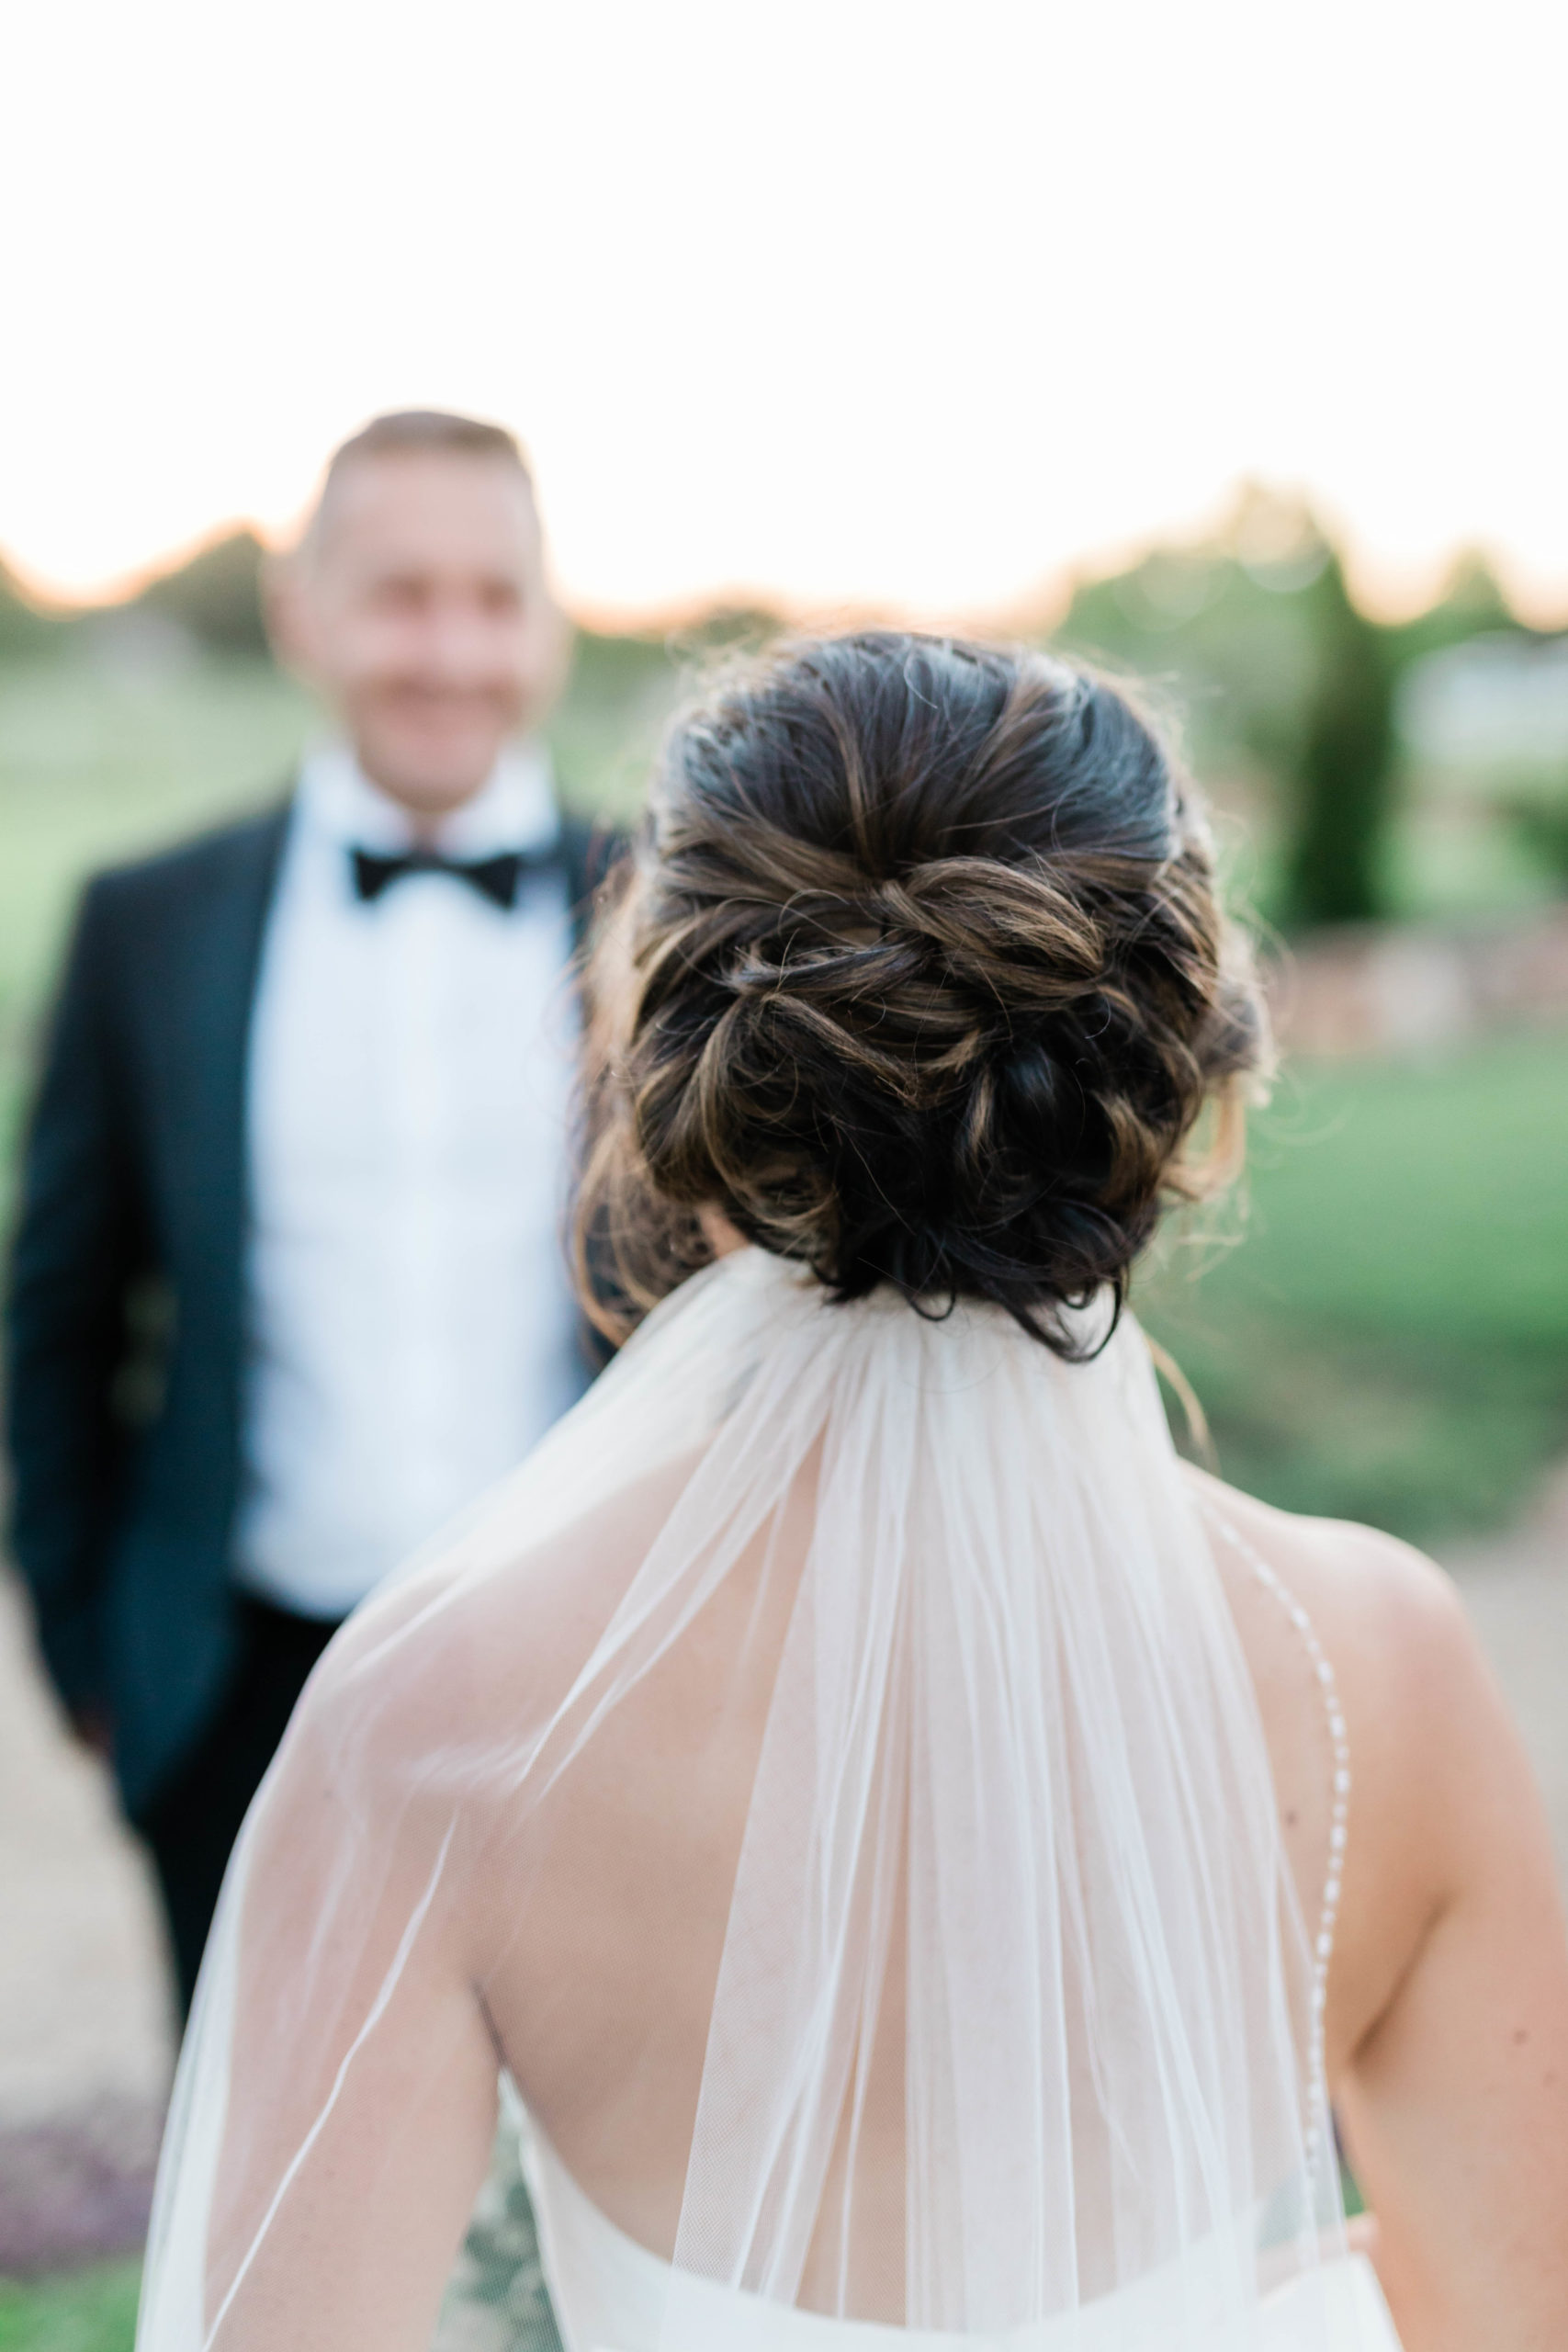 wedding updo for bride with a veil under the low bun as the bride walks to her groom